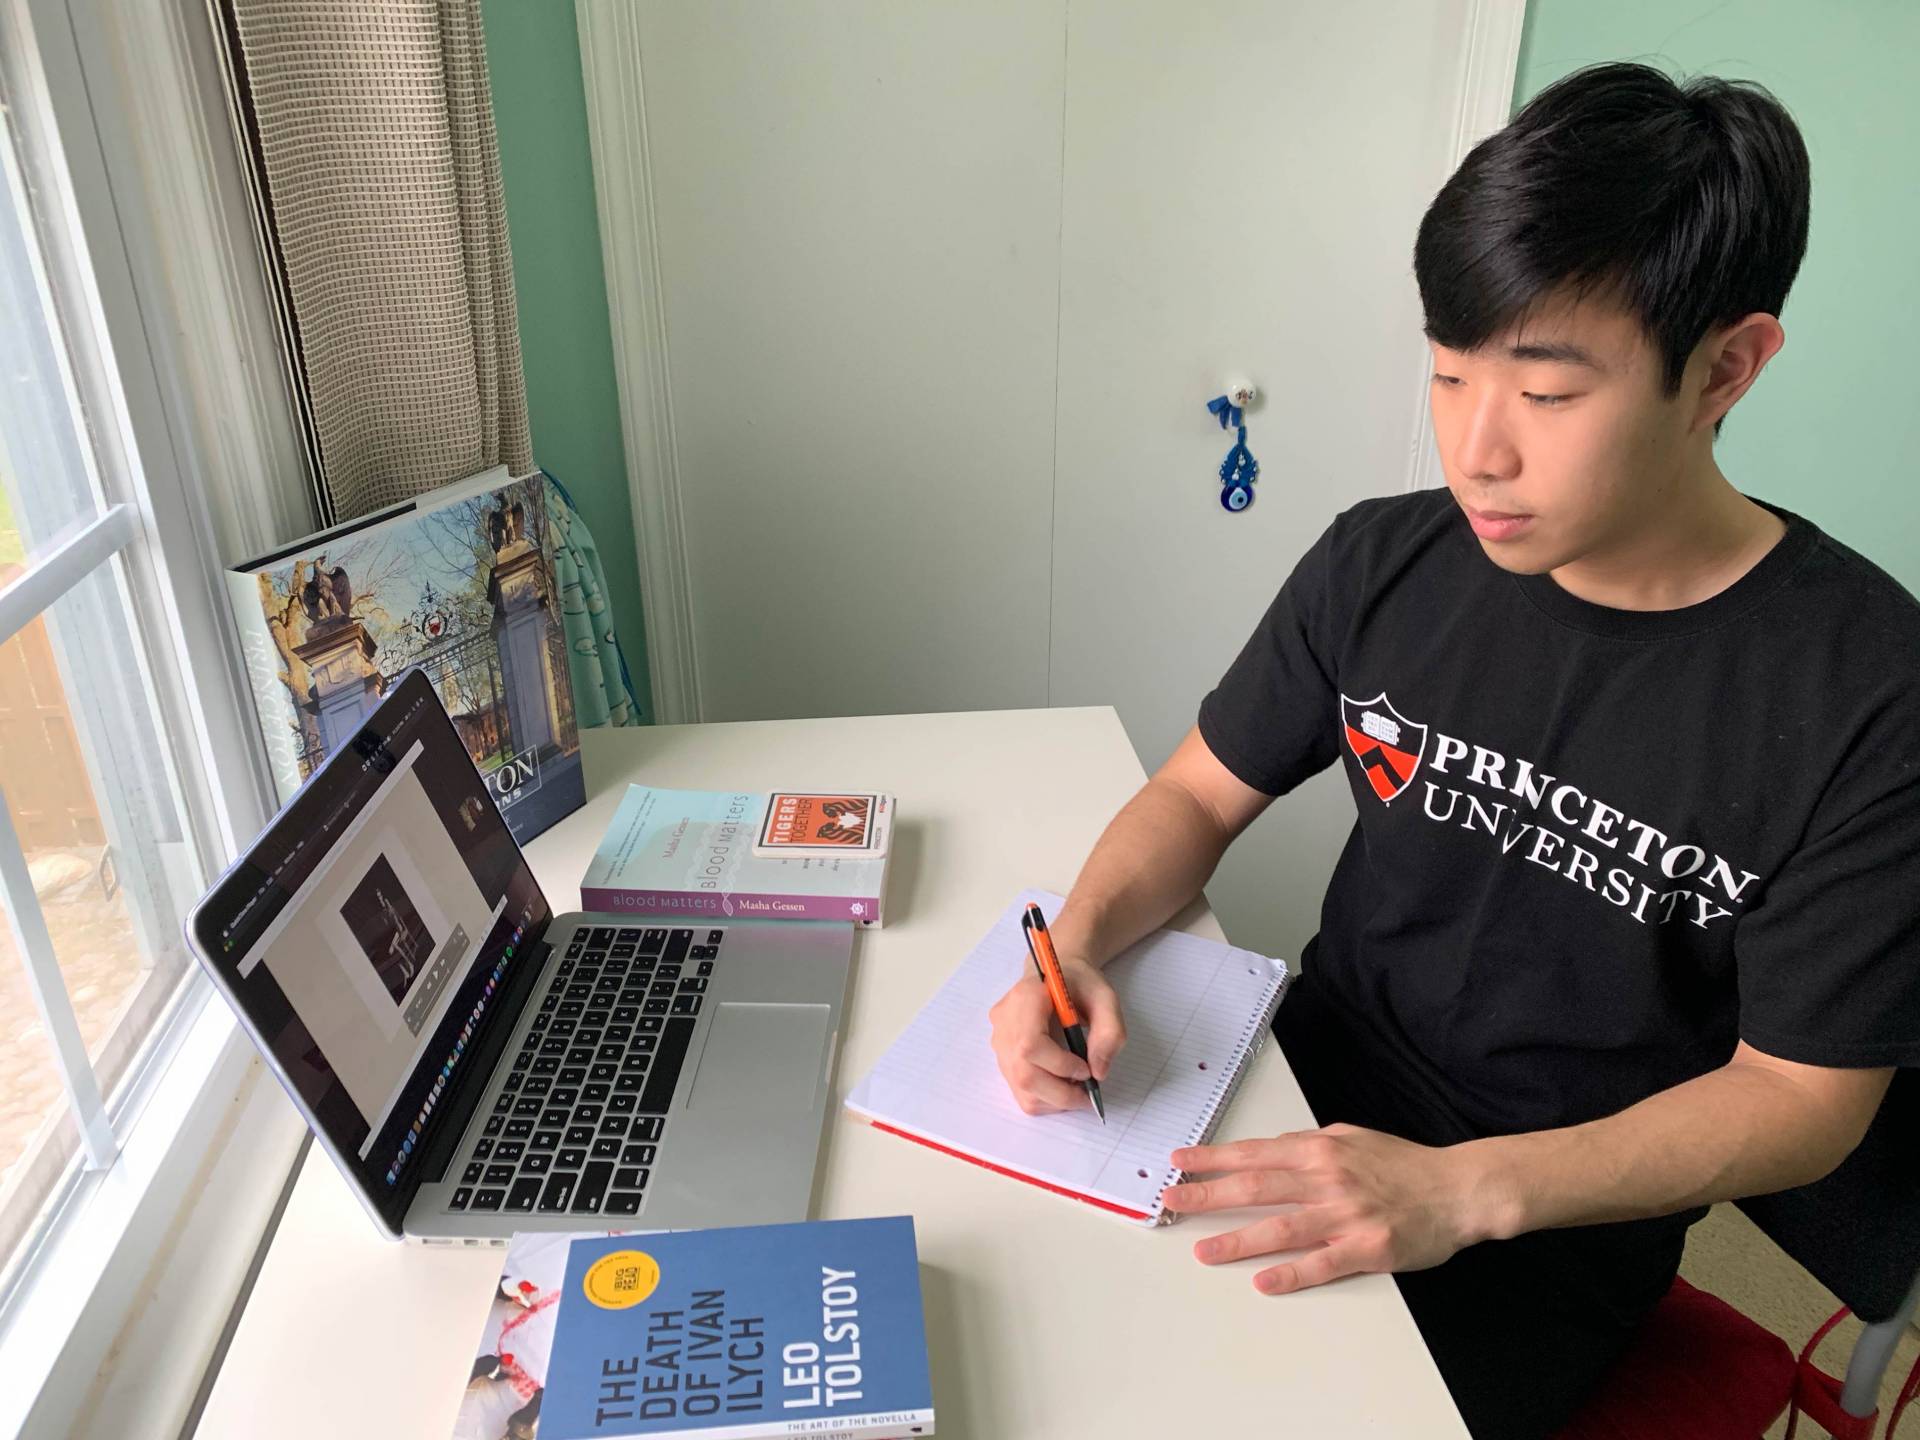 Jason Hong studies at a table in front of a laptop